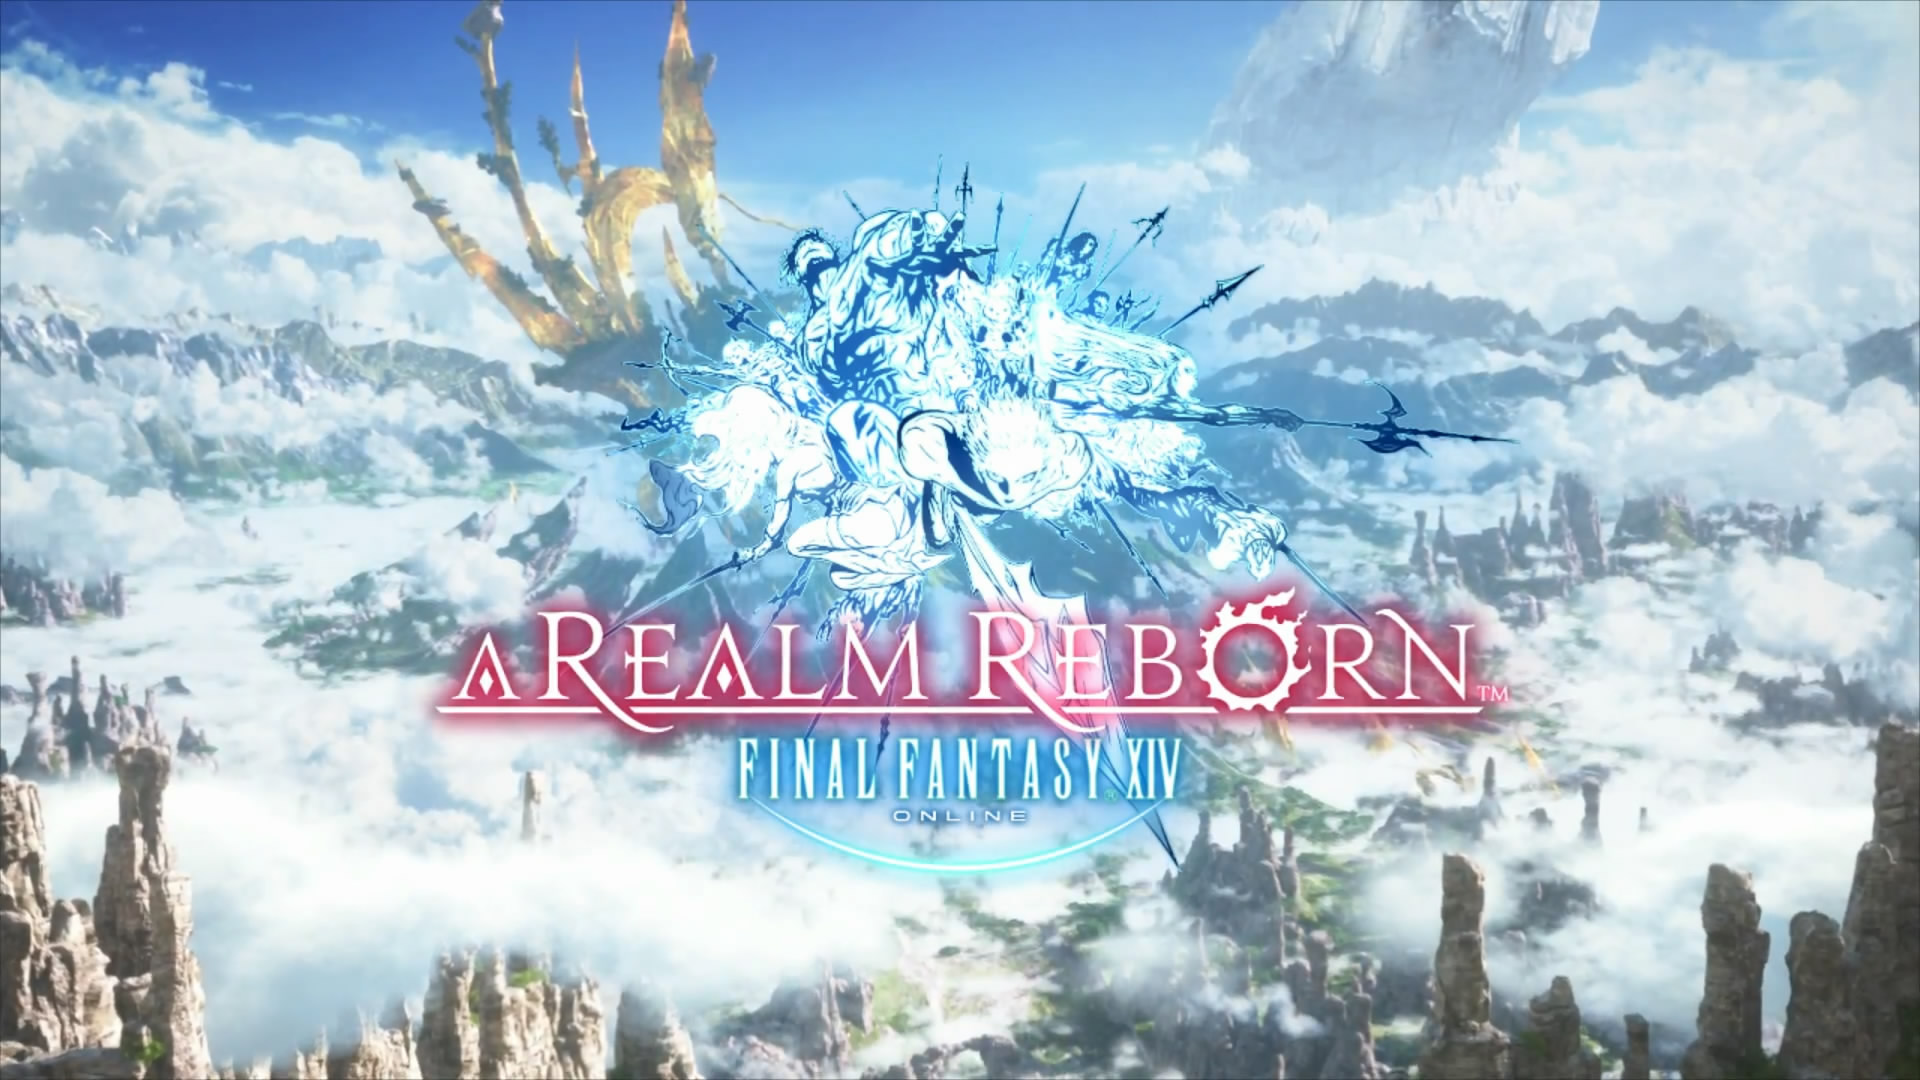 Final Fantasy Xiv A Realm Reborn Beginners Guide To The Level